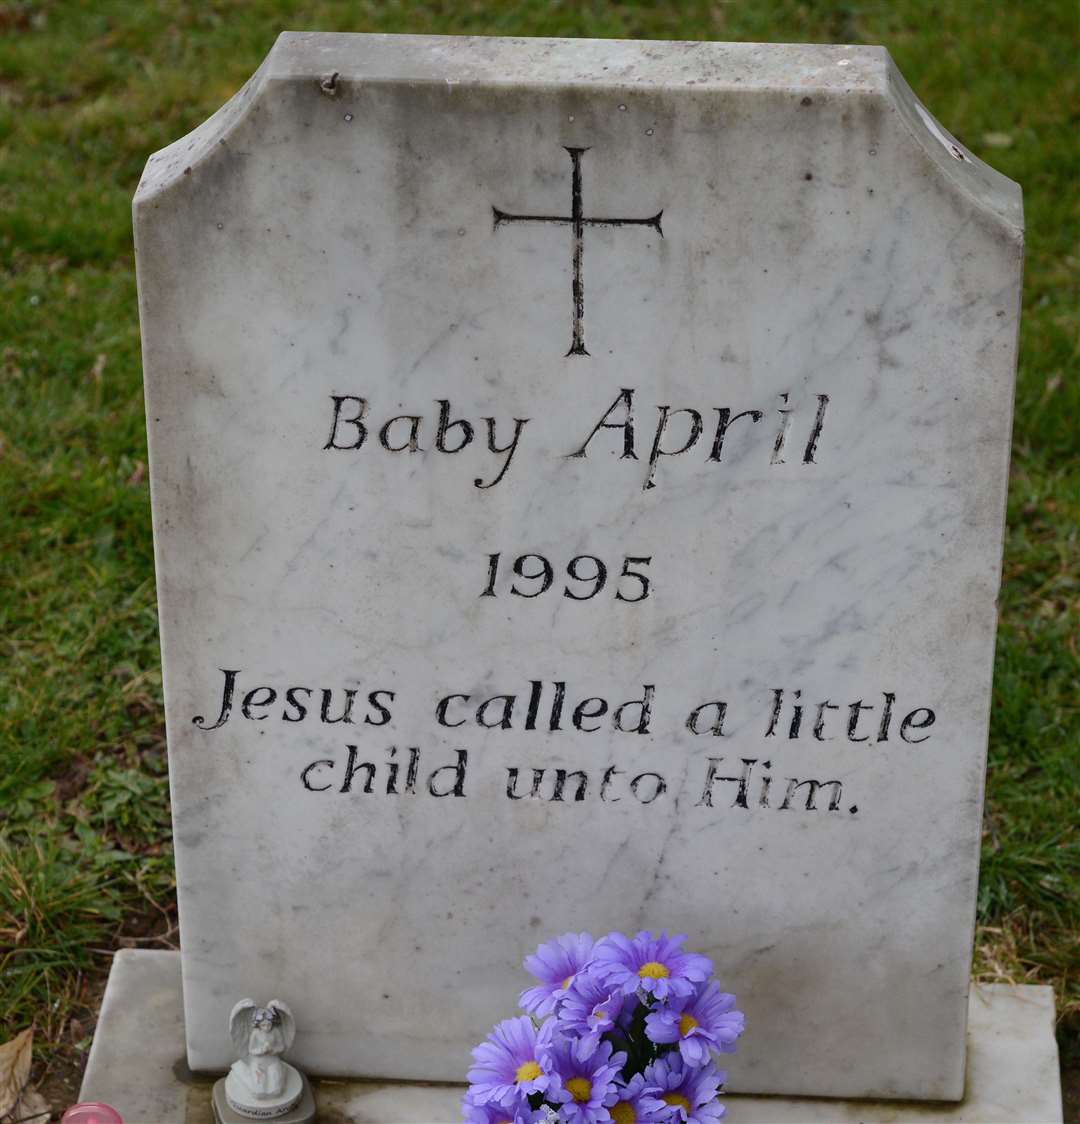 Baby April's tombstone in Bybrook Cemetery. Picture: Gary Browne